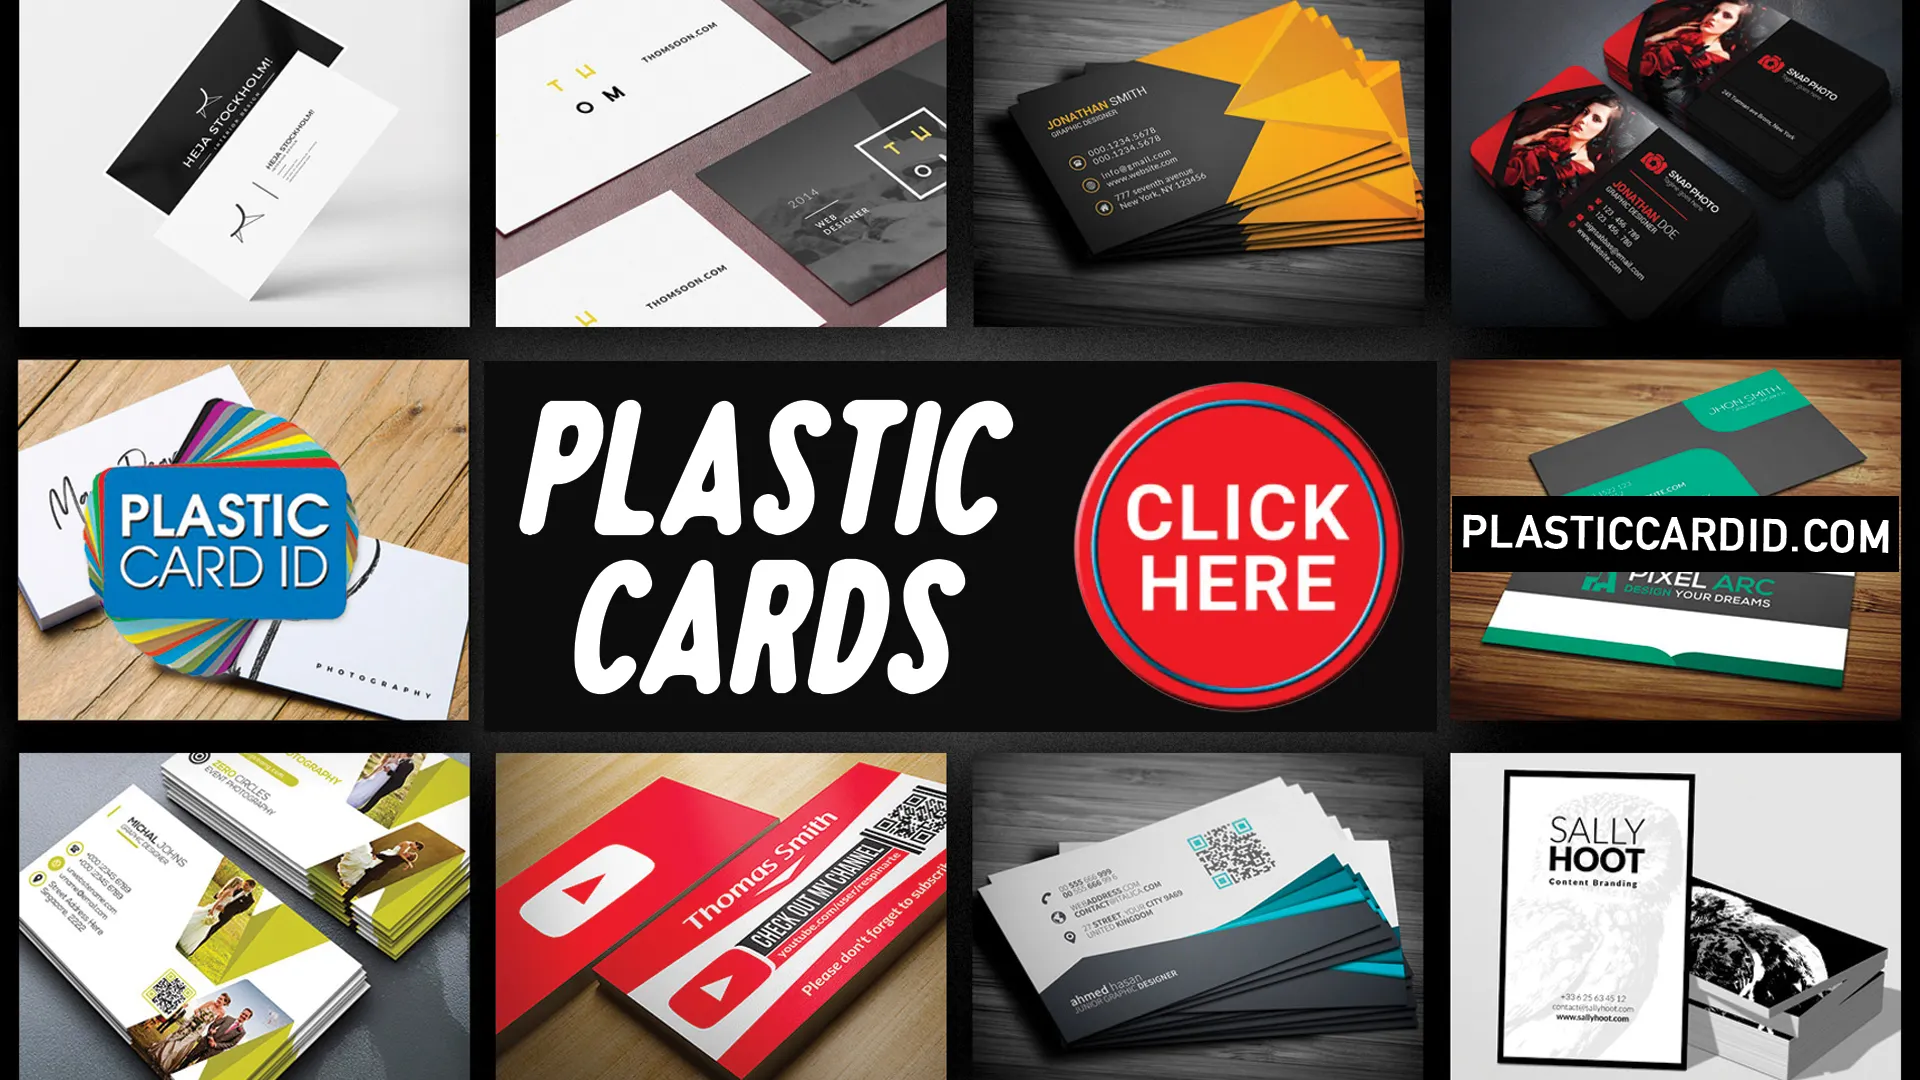 Accessorize Your Card Printing with the Right Supplies